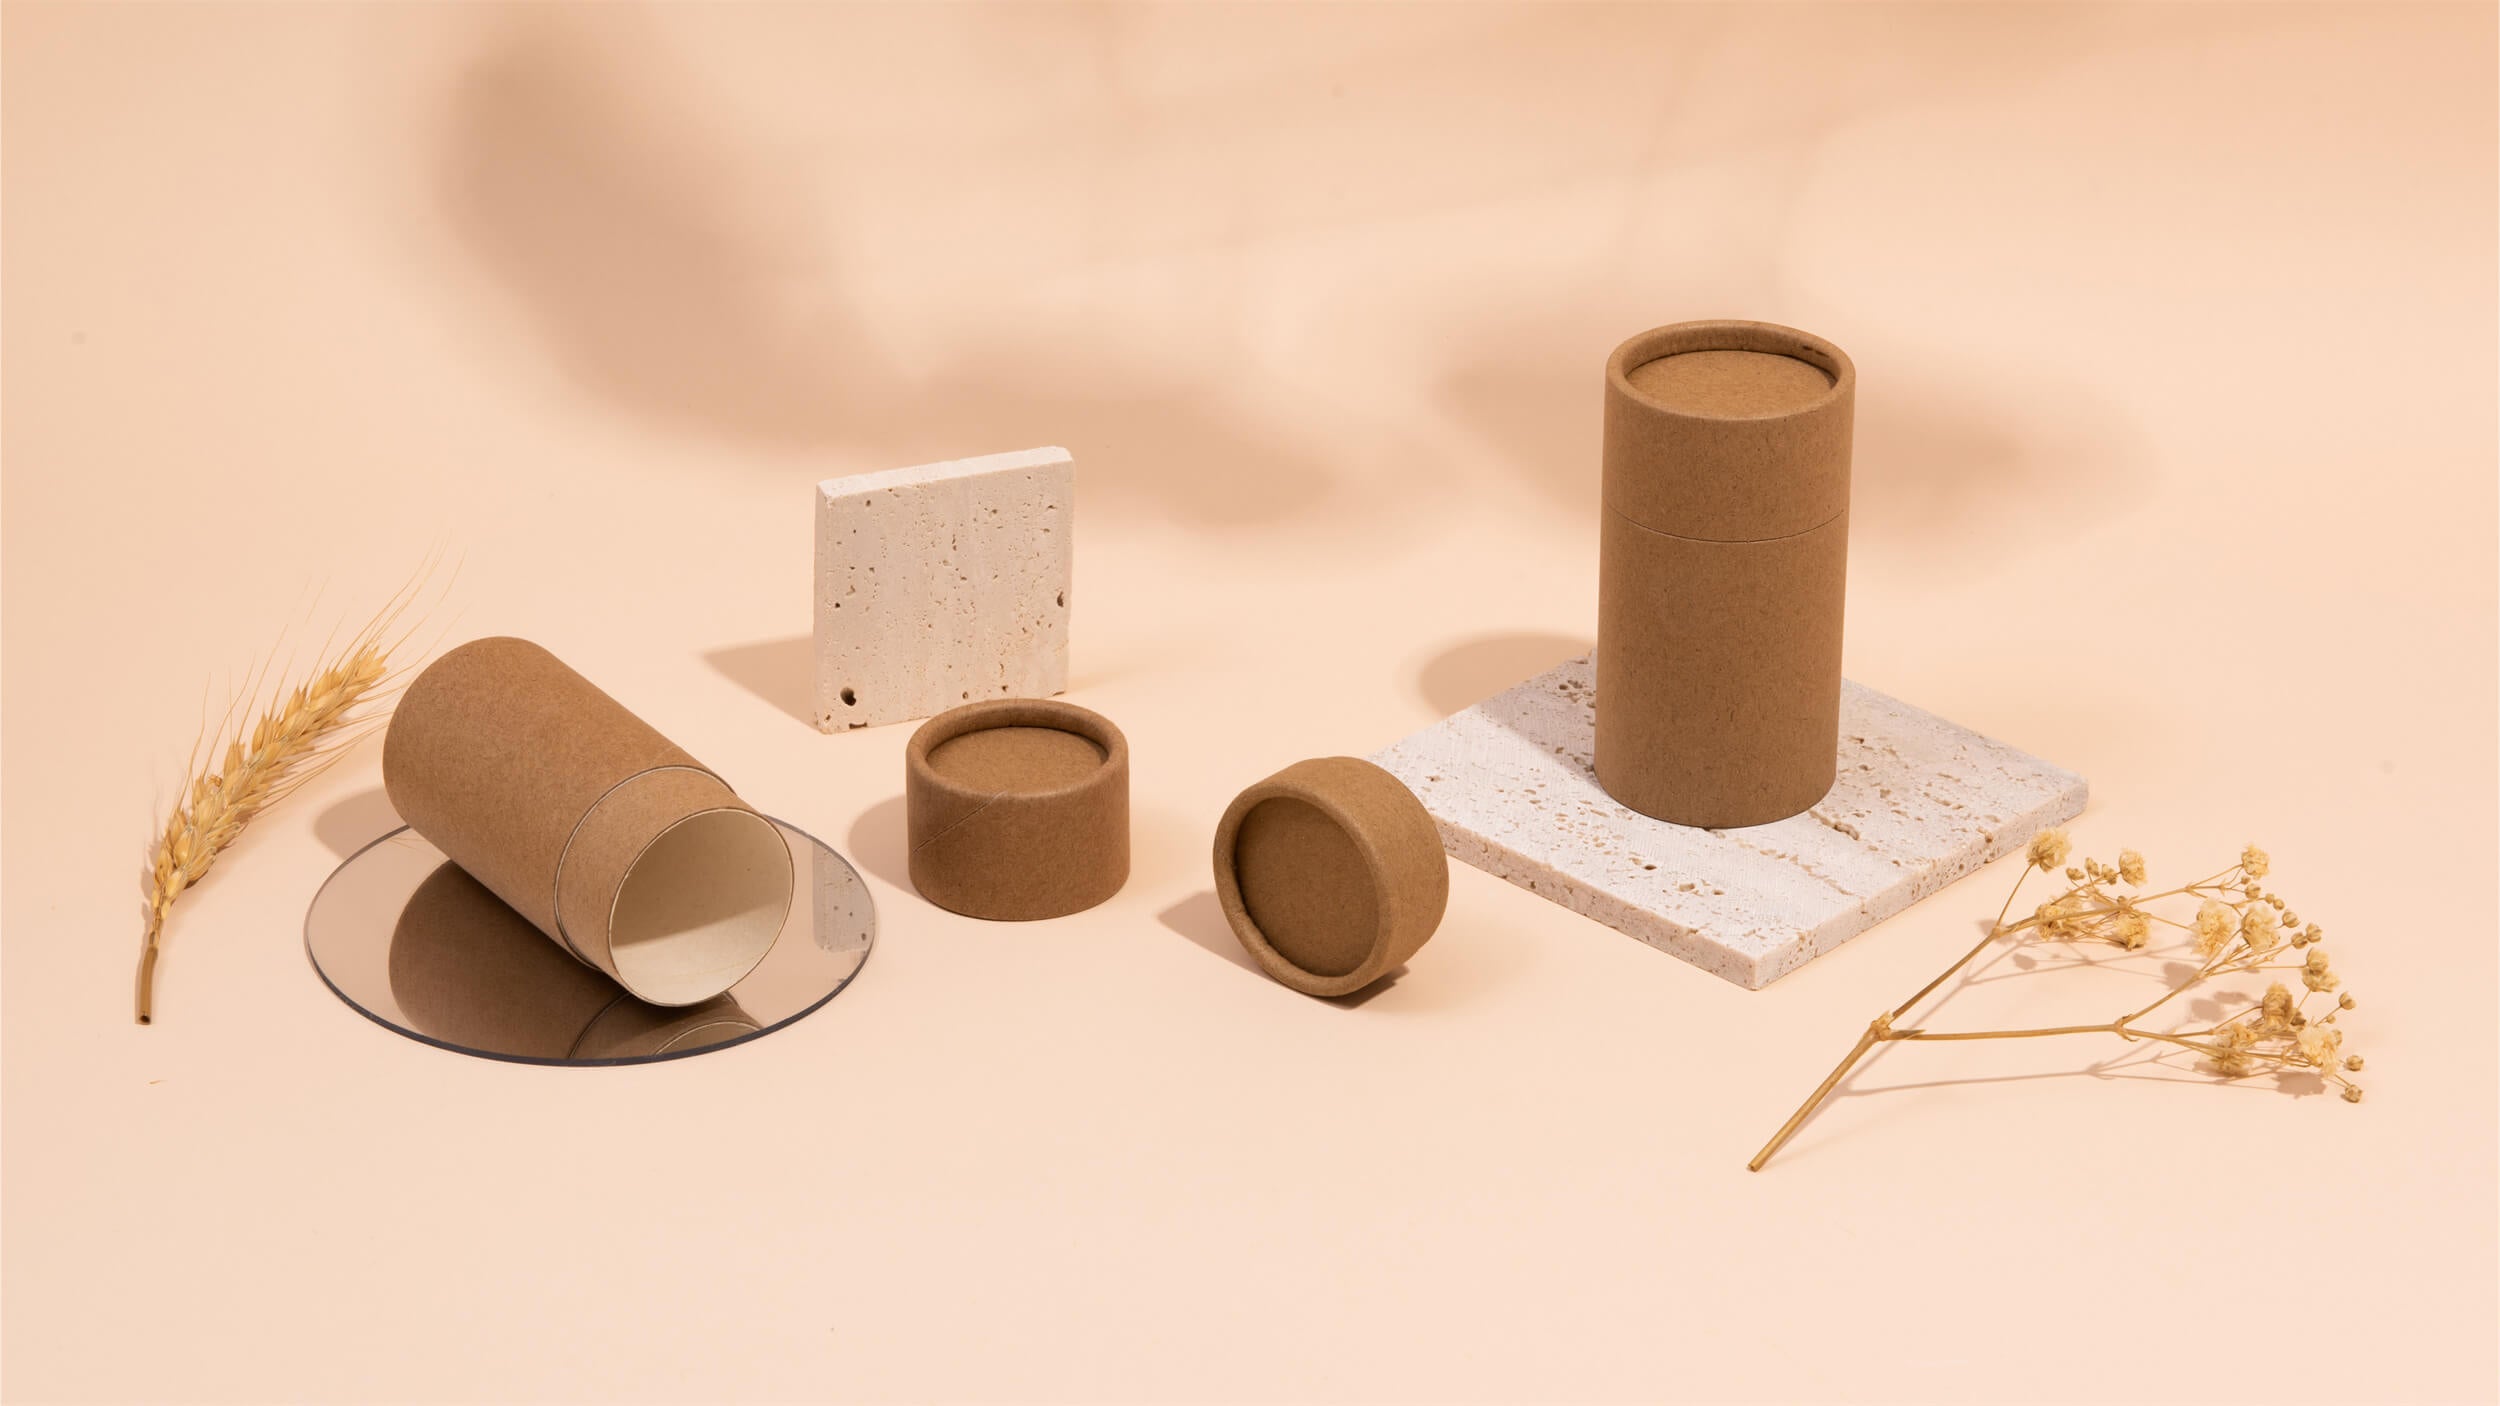 Varied sizes of cylindrical kraft paper tubes casually arranged on a peach background with white terrazzo blocks, a stalk of wheat, and dried flowers for decoration.